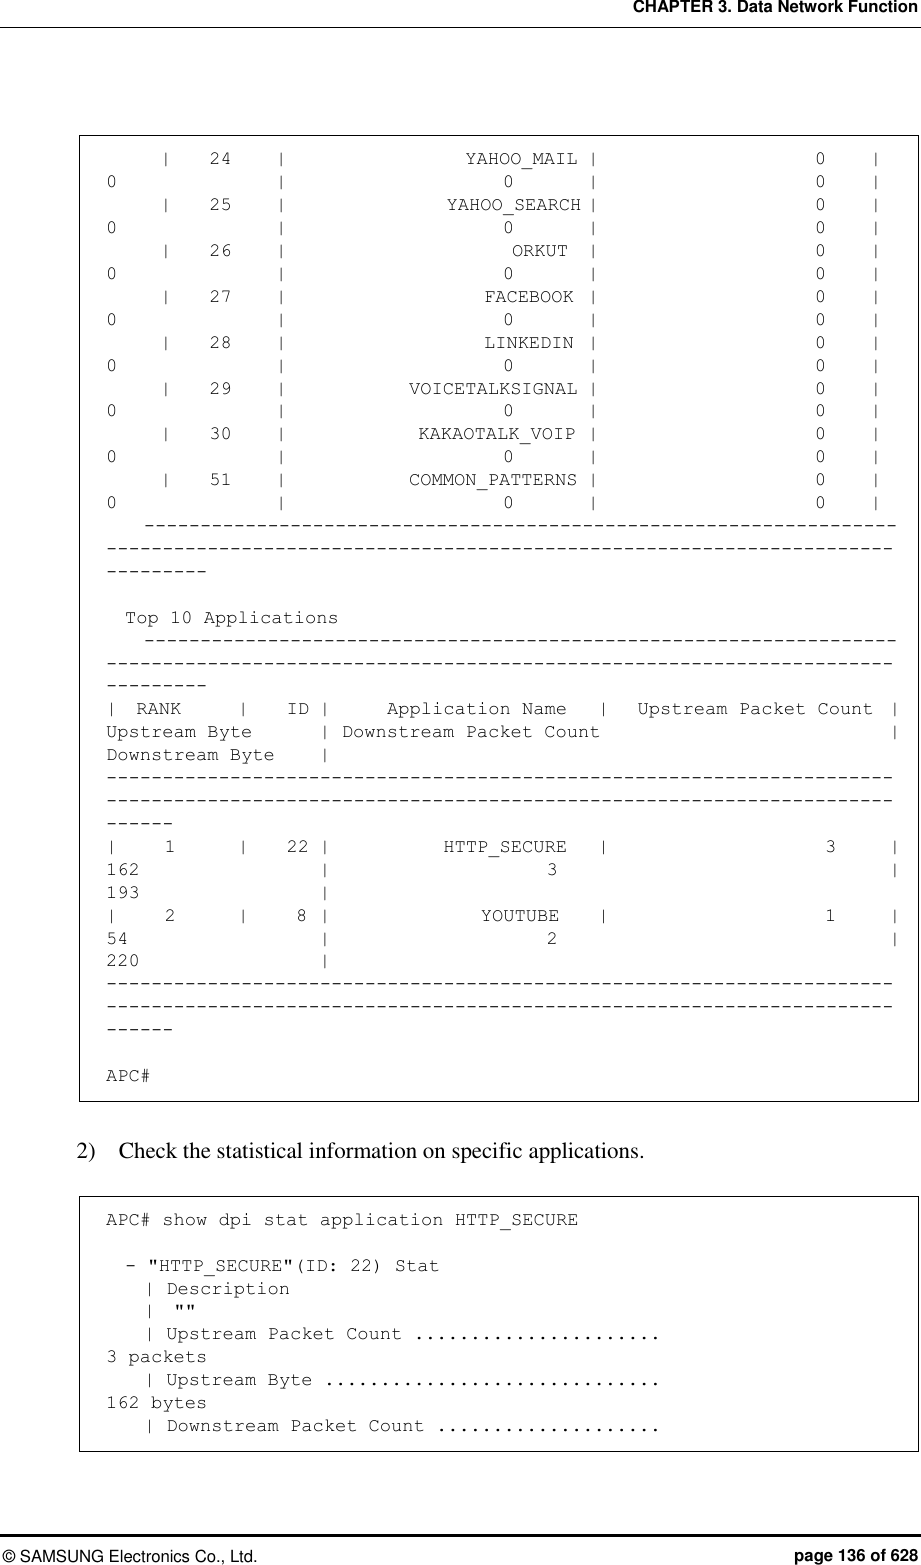 CHAPTER 3. Data Network Function ©  SAMSUNG Electronics Co., Ltd.  page 136 of 628        |    24   |                   YAHOO_MAIL  |                       0   |                       0     |                       0   |                       0   |       |    25   |                 YAHOO_SEARCH |                       0   |                       0     |                       0   |                       0   |       |    26   |                        ORKUT  |                       0   |                       0     |                       0   |                       0   |       |    27   |                     FACEBOOK  |                       0   |                       0     |                       0   |                       0   |       |    28   |                     LINKEDIN  |                       0   |                       0     |                       0   |                       0   |       |    29   |             VOICETALKSIGNAL  |                       0   |                       0     |                       0   |                       0   |       |    30   |              KAKAOTALK_VOIP  |                       0   |                       0     |                       0   |                       0   |       |    51   |             COMMON_PATTERNS  |                       0   |                       0     |                       0   |                       0   |     --------------------------------------------------------------------------------------------------------------------------------------------------    Top 10 Applications     -------------------------------------------------------------------------------------------------------------------------------------------------- |  RANK   |    ID  |      Application Name   |   Upstream Packet Count  |           Upstream Byte   | Downstream Packet Count  |         Downstream Byte   | -------------------------------------------------------------------------------------------------------------------------------------------------- |     1   |    22 |            HTTP_SECURE   |                       3   |                     162     |                       3     |                     193     | |     2   |     8 |                YOUTUBE   |                       1   |                      54      |                       2     |                     220     | --------------------------------------------------------------------------------------------------------------------------------------------------  APC#  2)    Check the statistical information on specific applications.  APC# show dpi stat application HTTP_SECURE    - &quot;HTTP_SECURE&quot;(ID: 22) Stat     | Description     |  &quot;&quot;     | Upstream Packet Count ......................                               3 packets     | Upstream Byte ..............................                            162 bytes     | Downstream Packet Count ....................                               